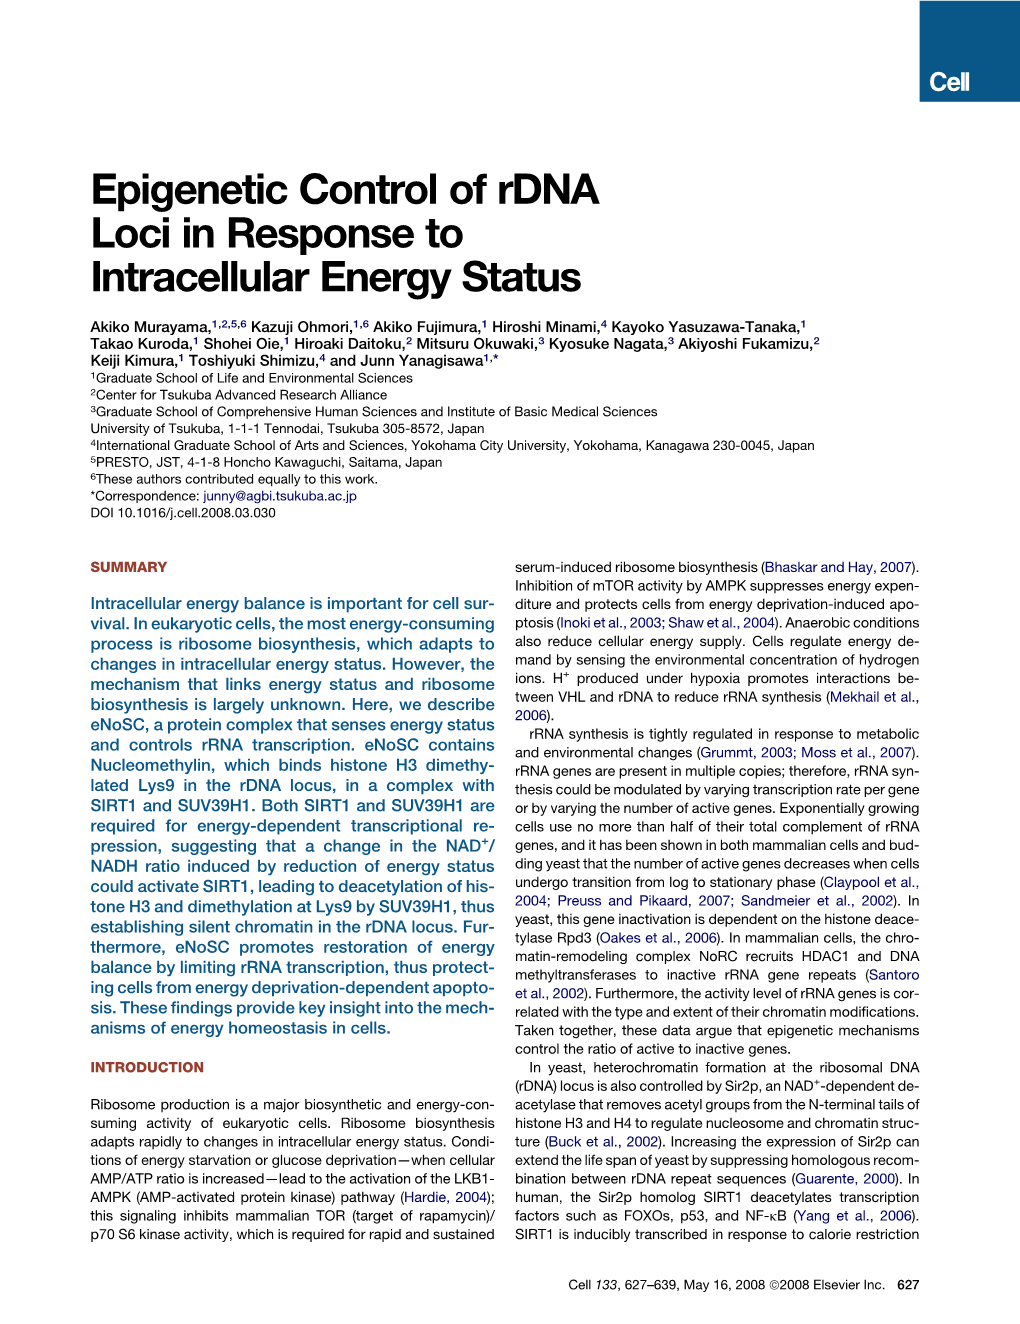 Epigenetic Control of Rdna Loci in Response to Intracellular Energy Status